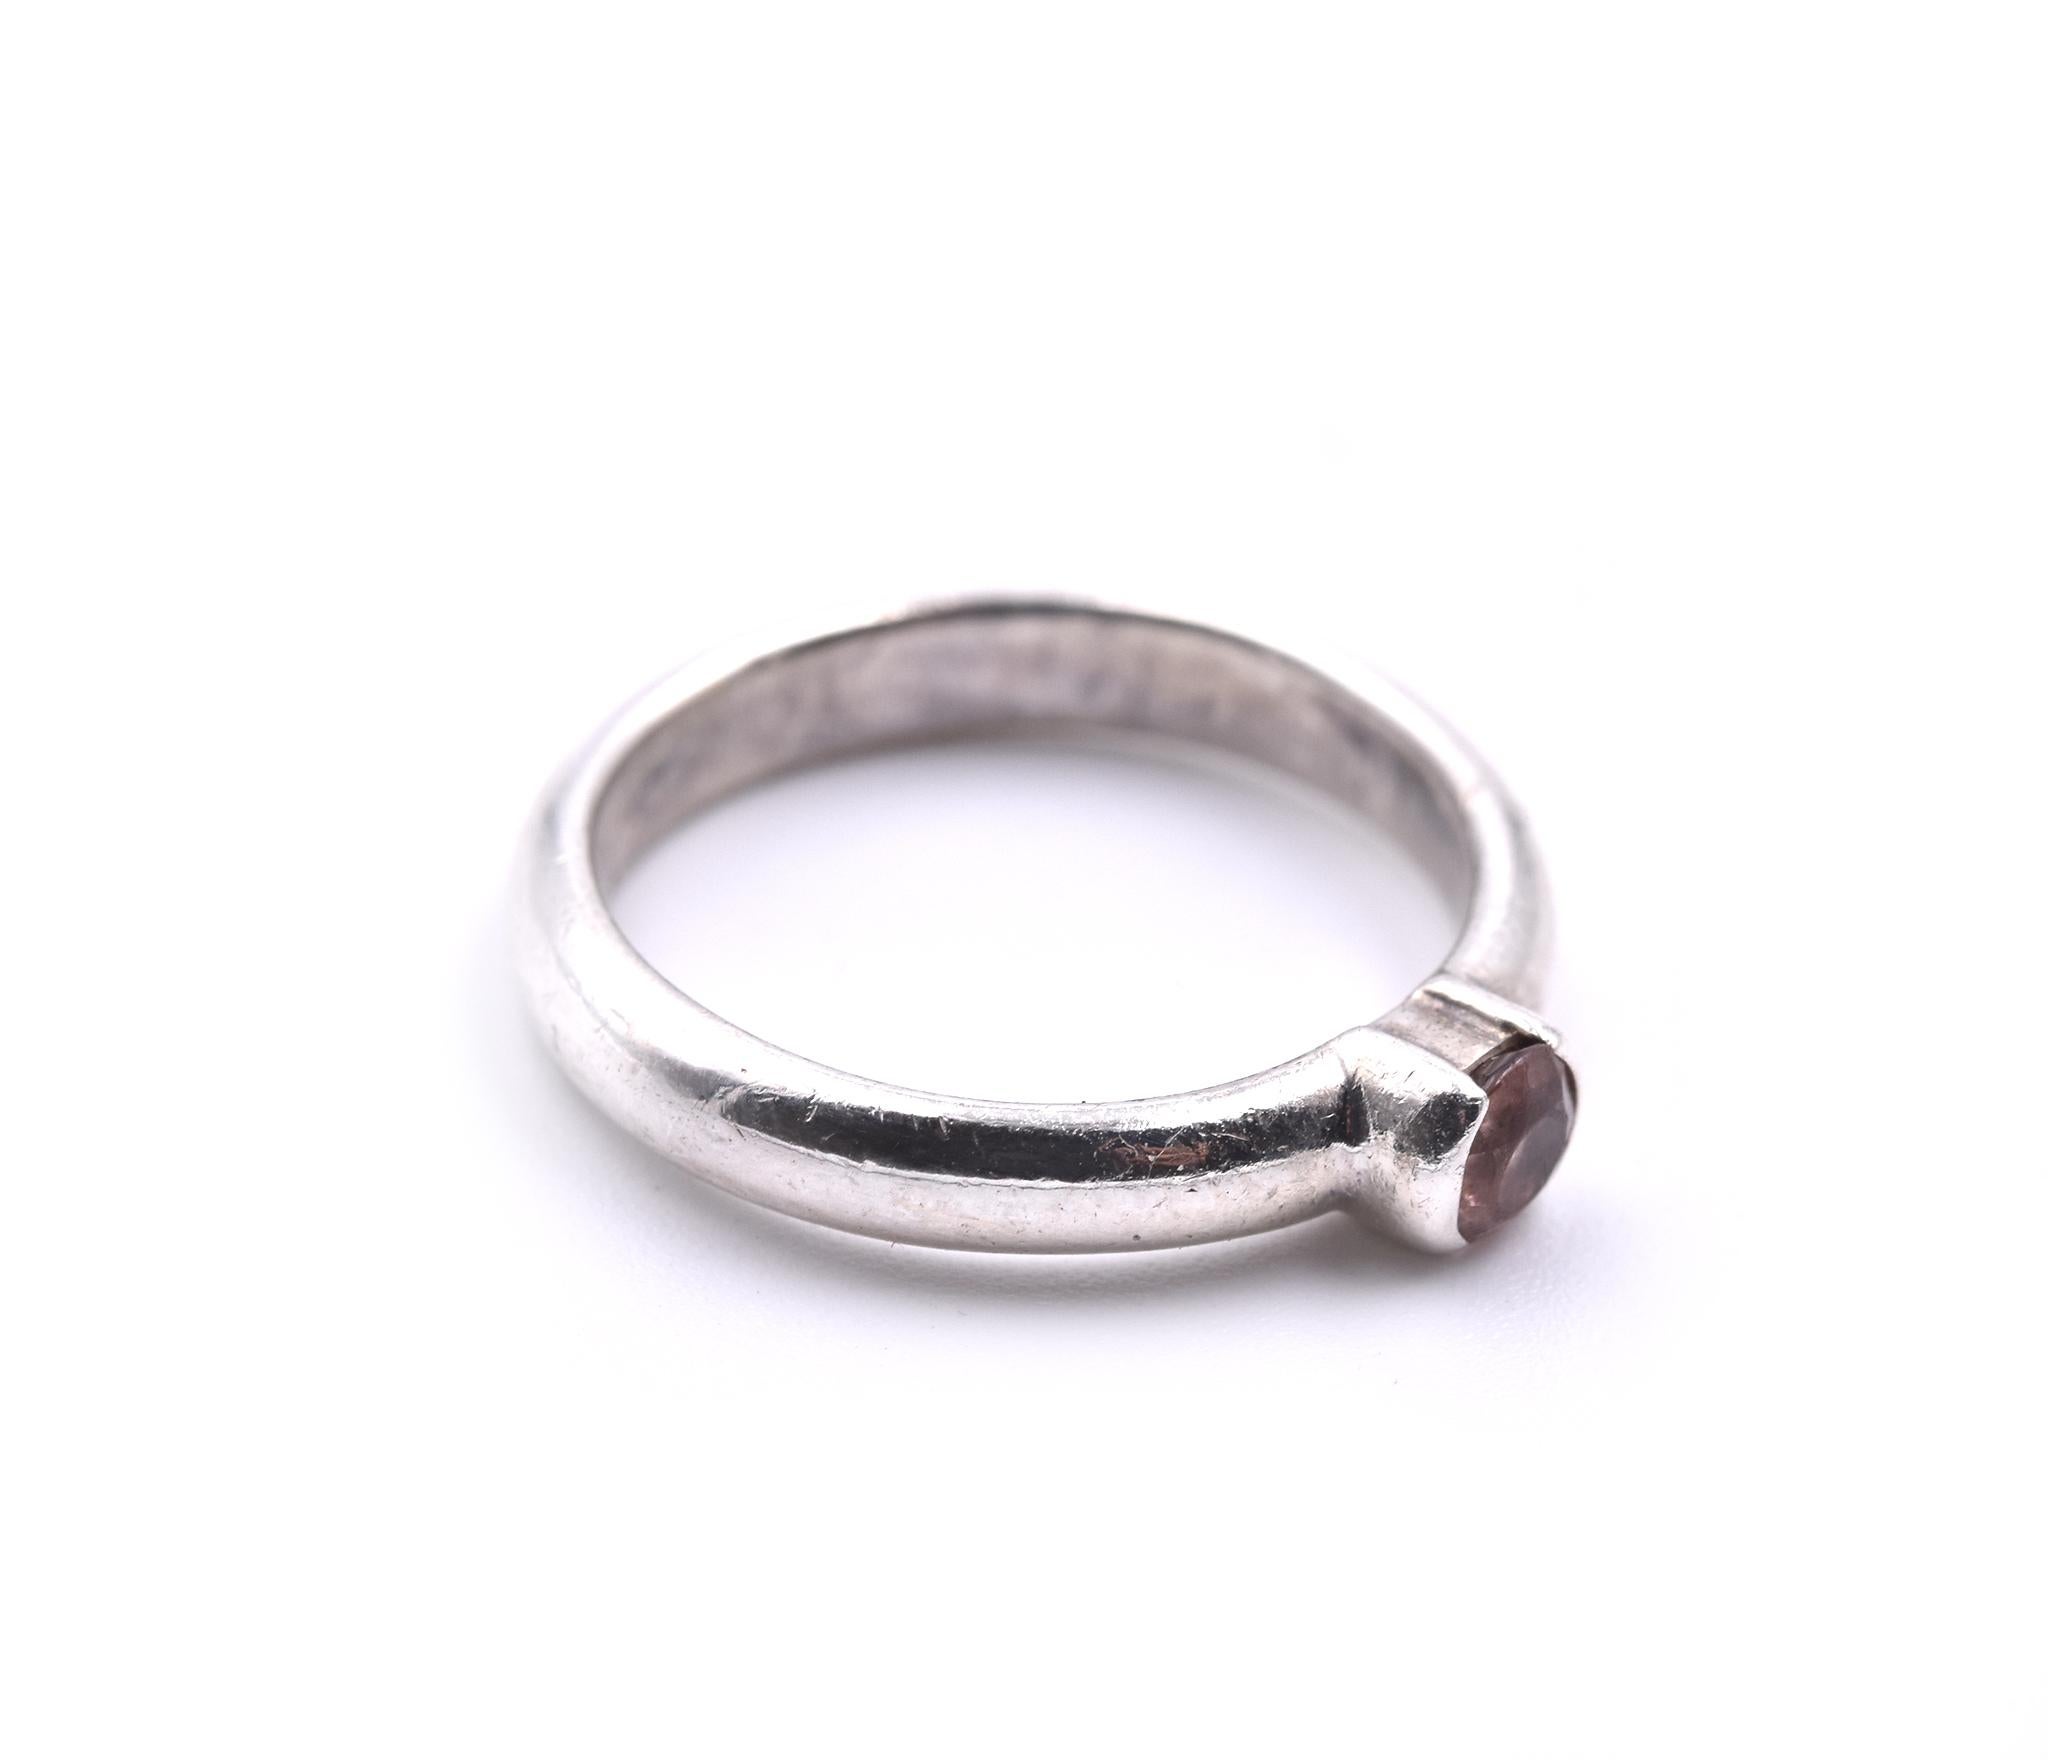 Designer: Tiffany & Co.
Material: sterling silver
Ring Size: 6 ¼  (please allow two extra shipping days for sizing requests)
Dimensions: ring is approximately 3.97mm wide 
Weight: 2.69 grams
